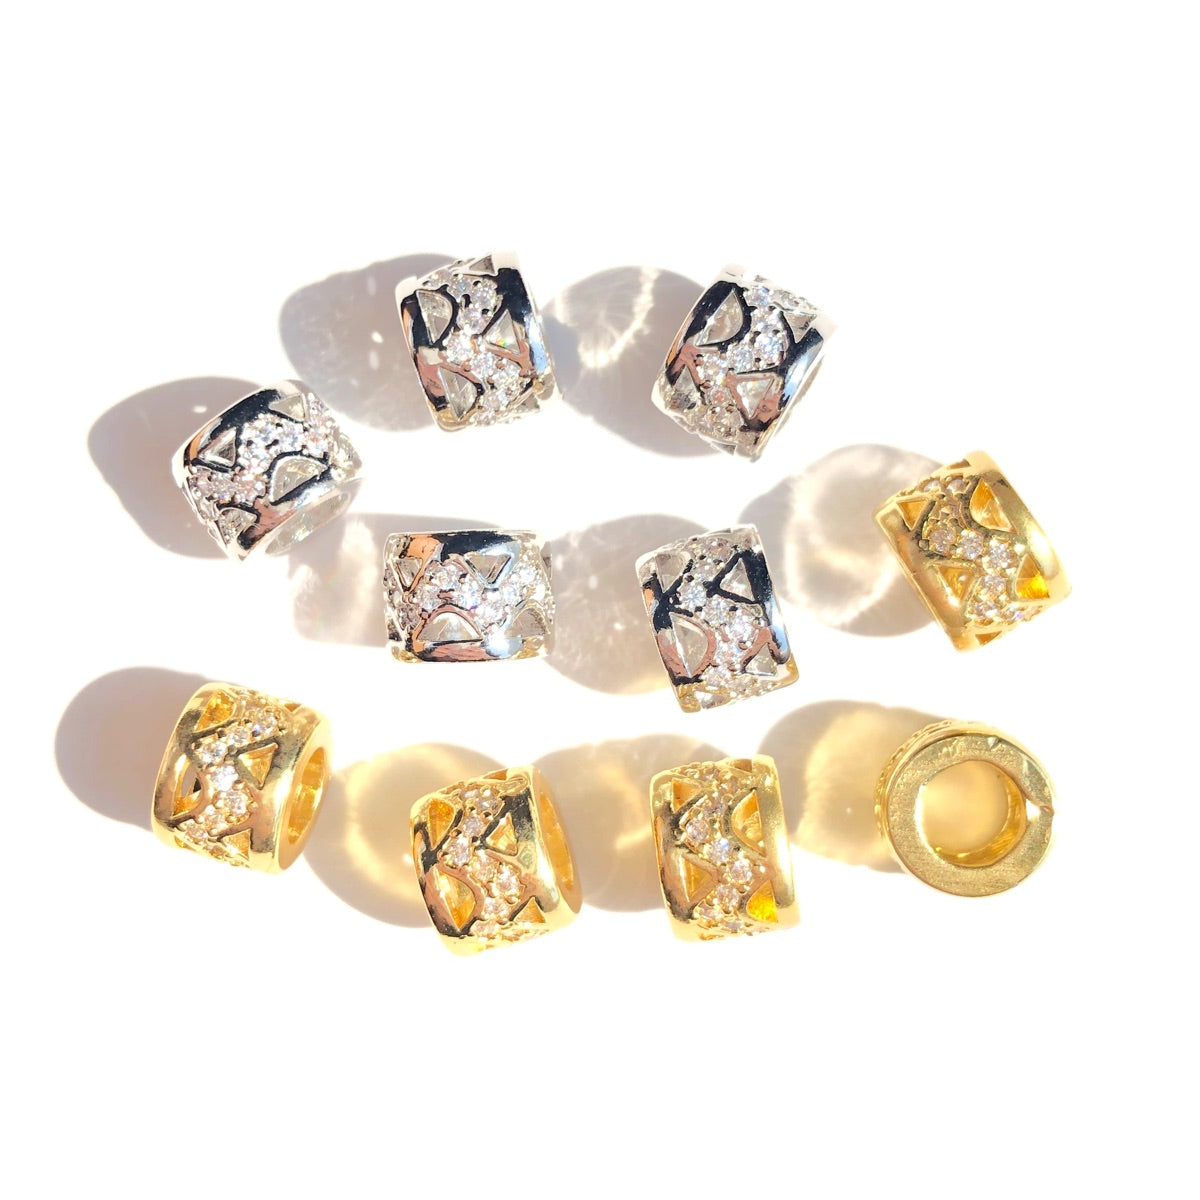 10-20-50pcs/lot 8mm CZ Paved Big Hole Hollow Rondelle Wheel Spacers Mix Colors CZ Paved Spacers Big Hole Beads New Spacers Arrivals Rondelle Beads Wholesale Charms Beads Beyond